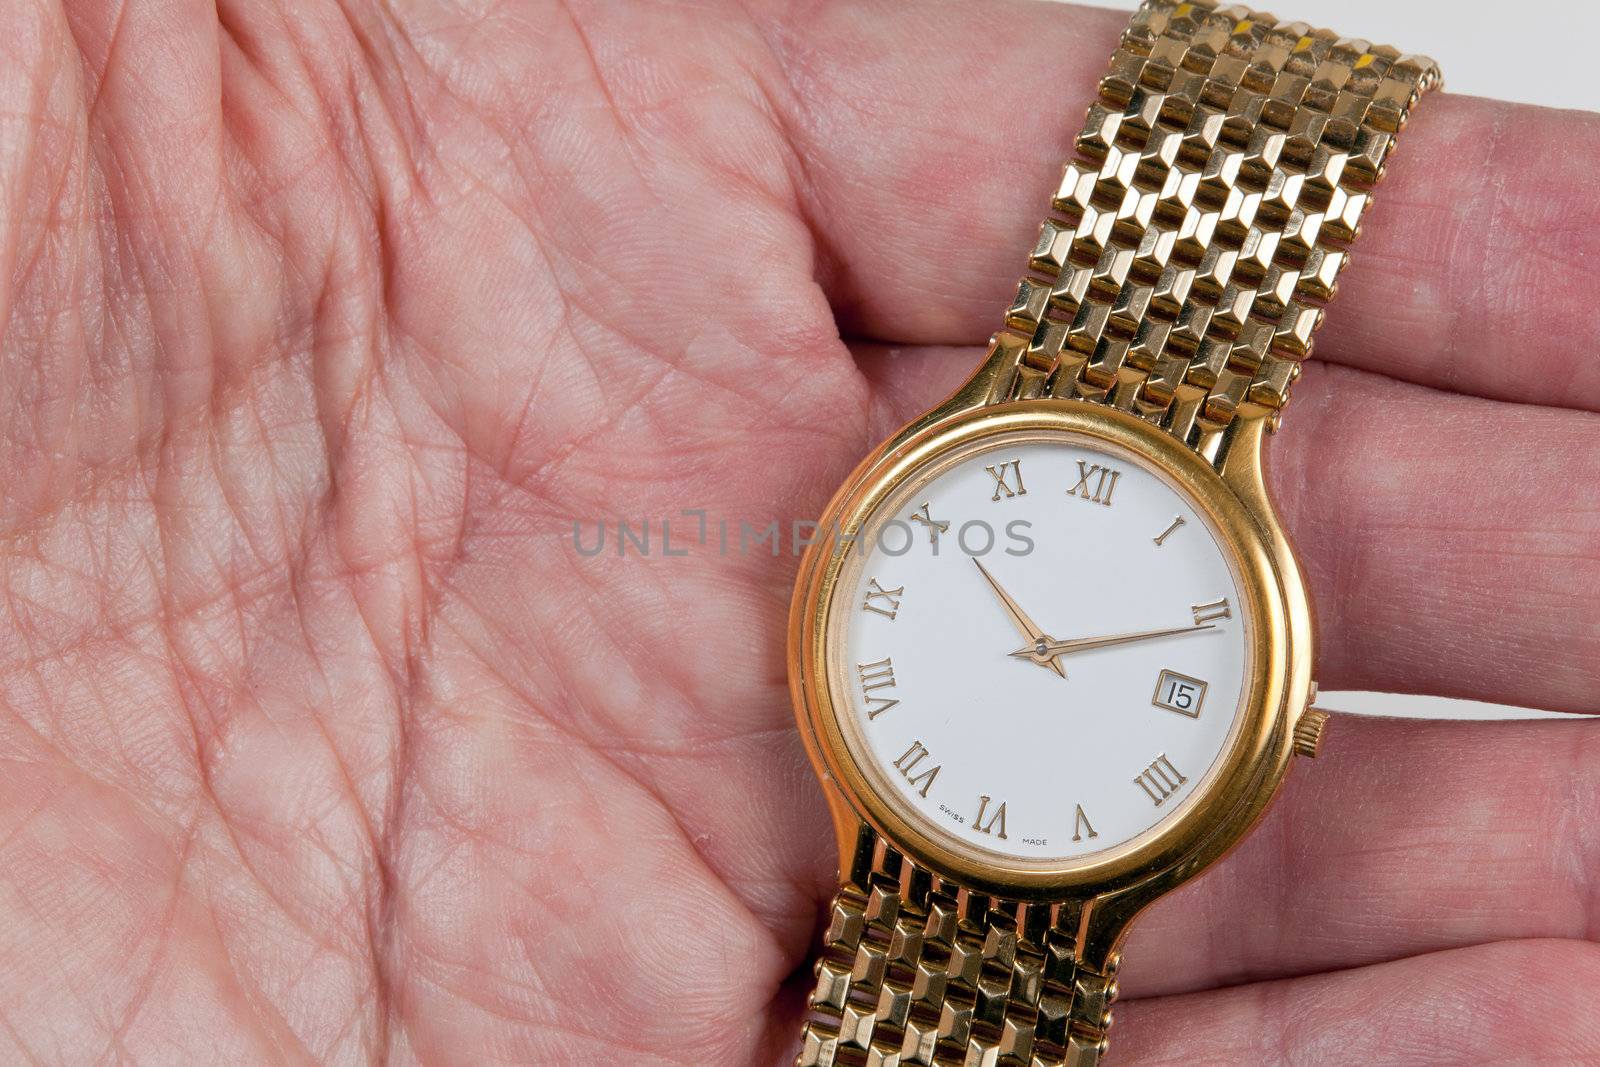 Gold watch and band in close up in palm of hand across fingers